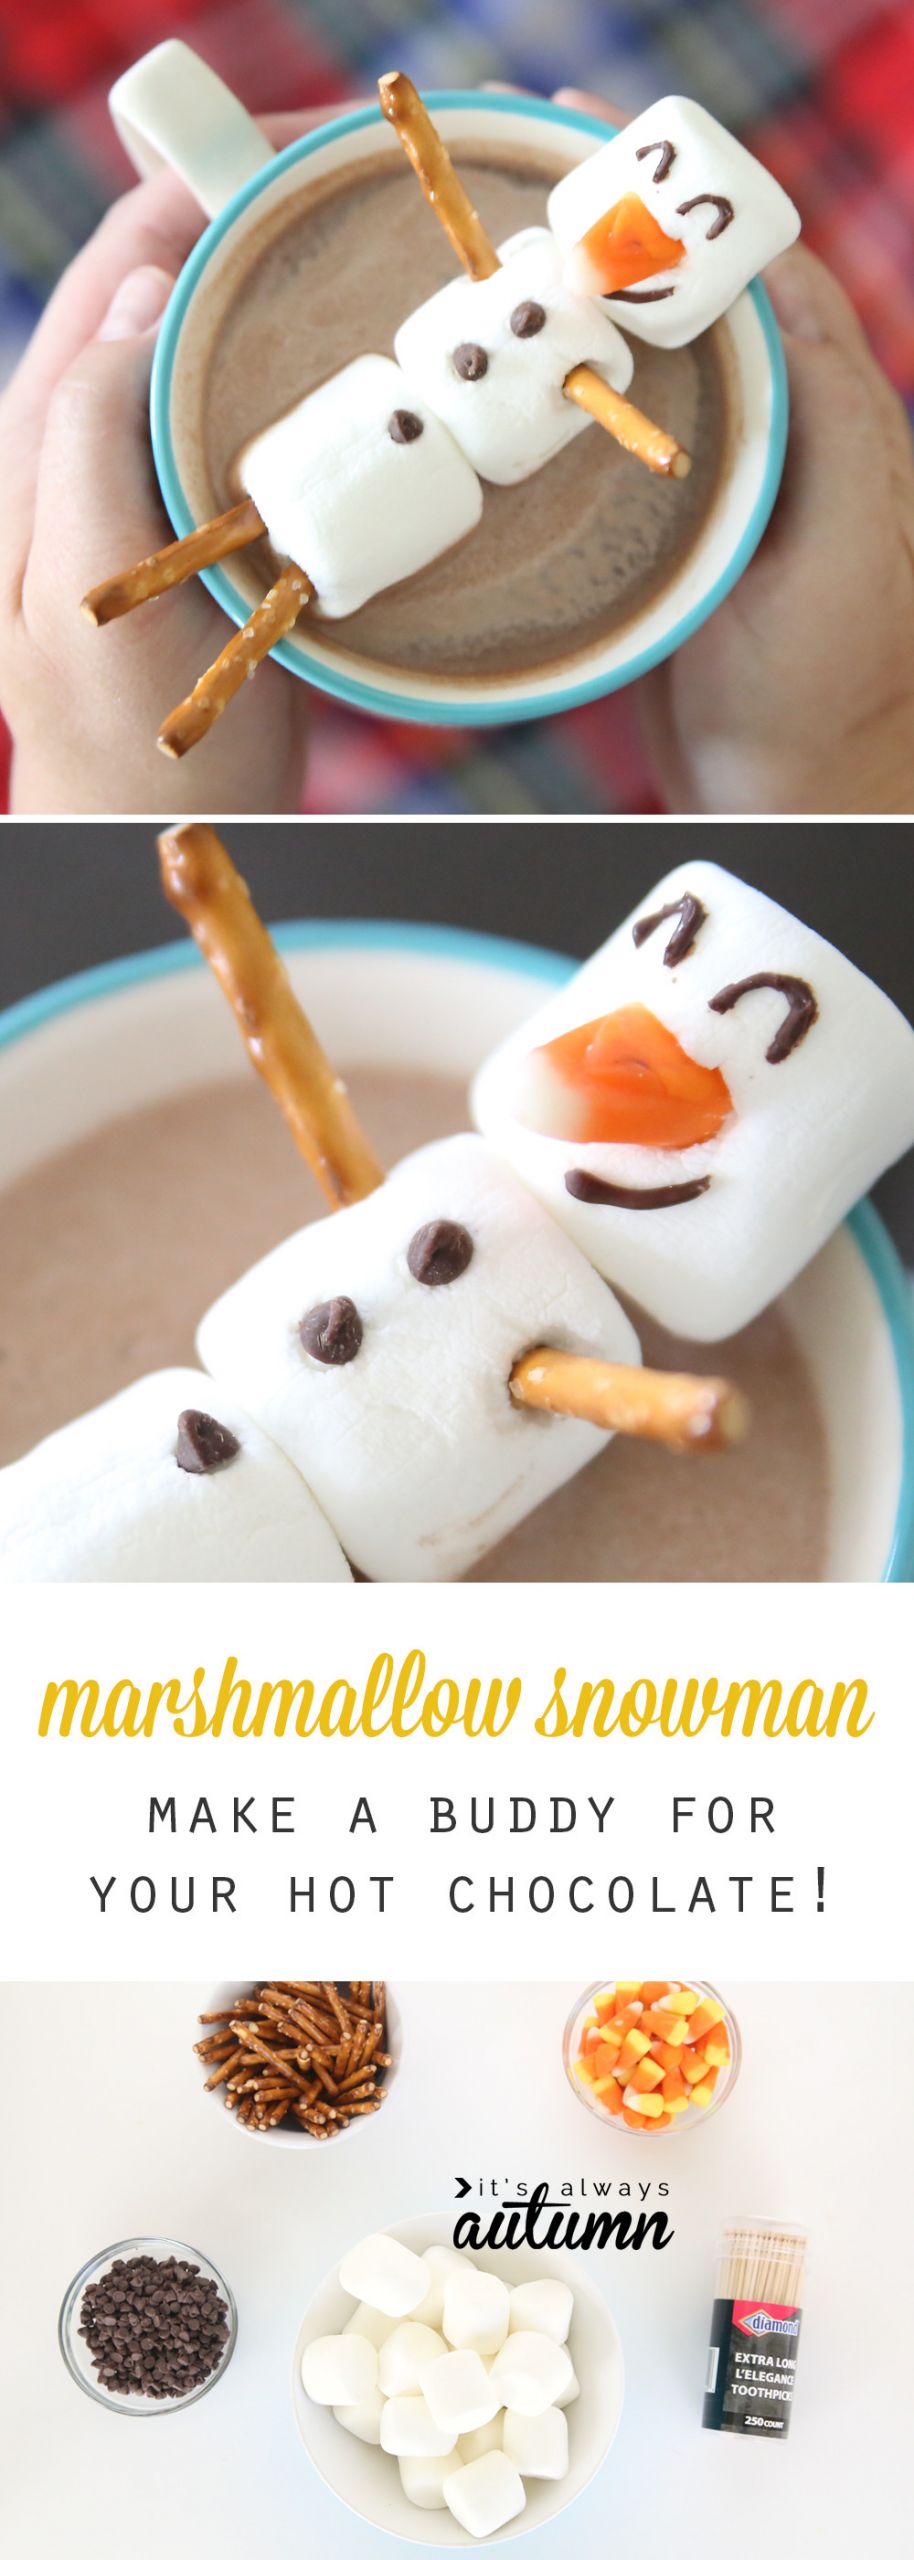 Fun Things For Kids To Make
 Over 30 Winter Themed Fun Food Ideas and Easy Crafts Kids